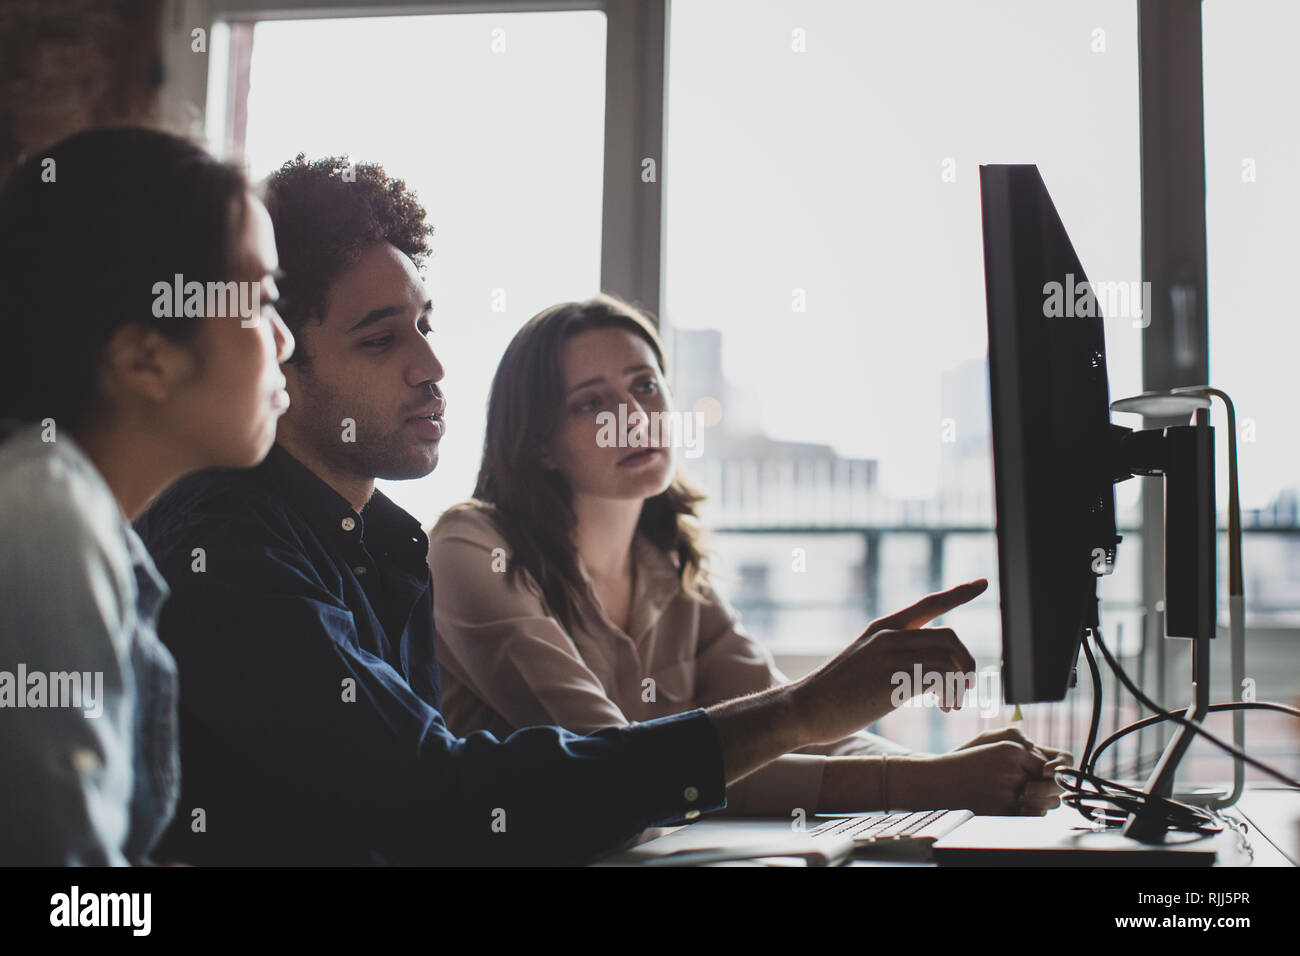 Coworkers looking at a desktop computer together Stock Photo